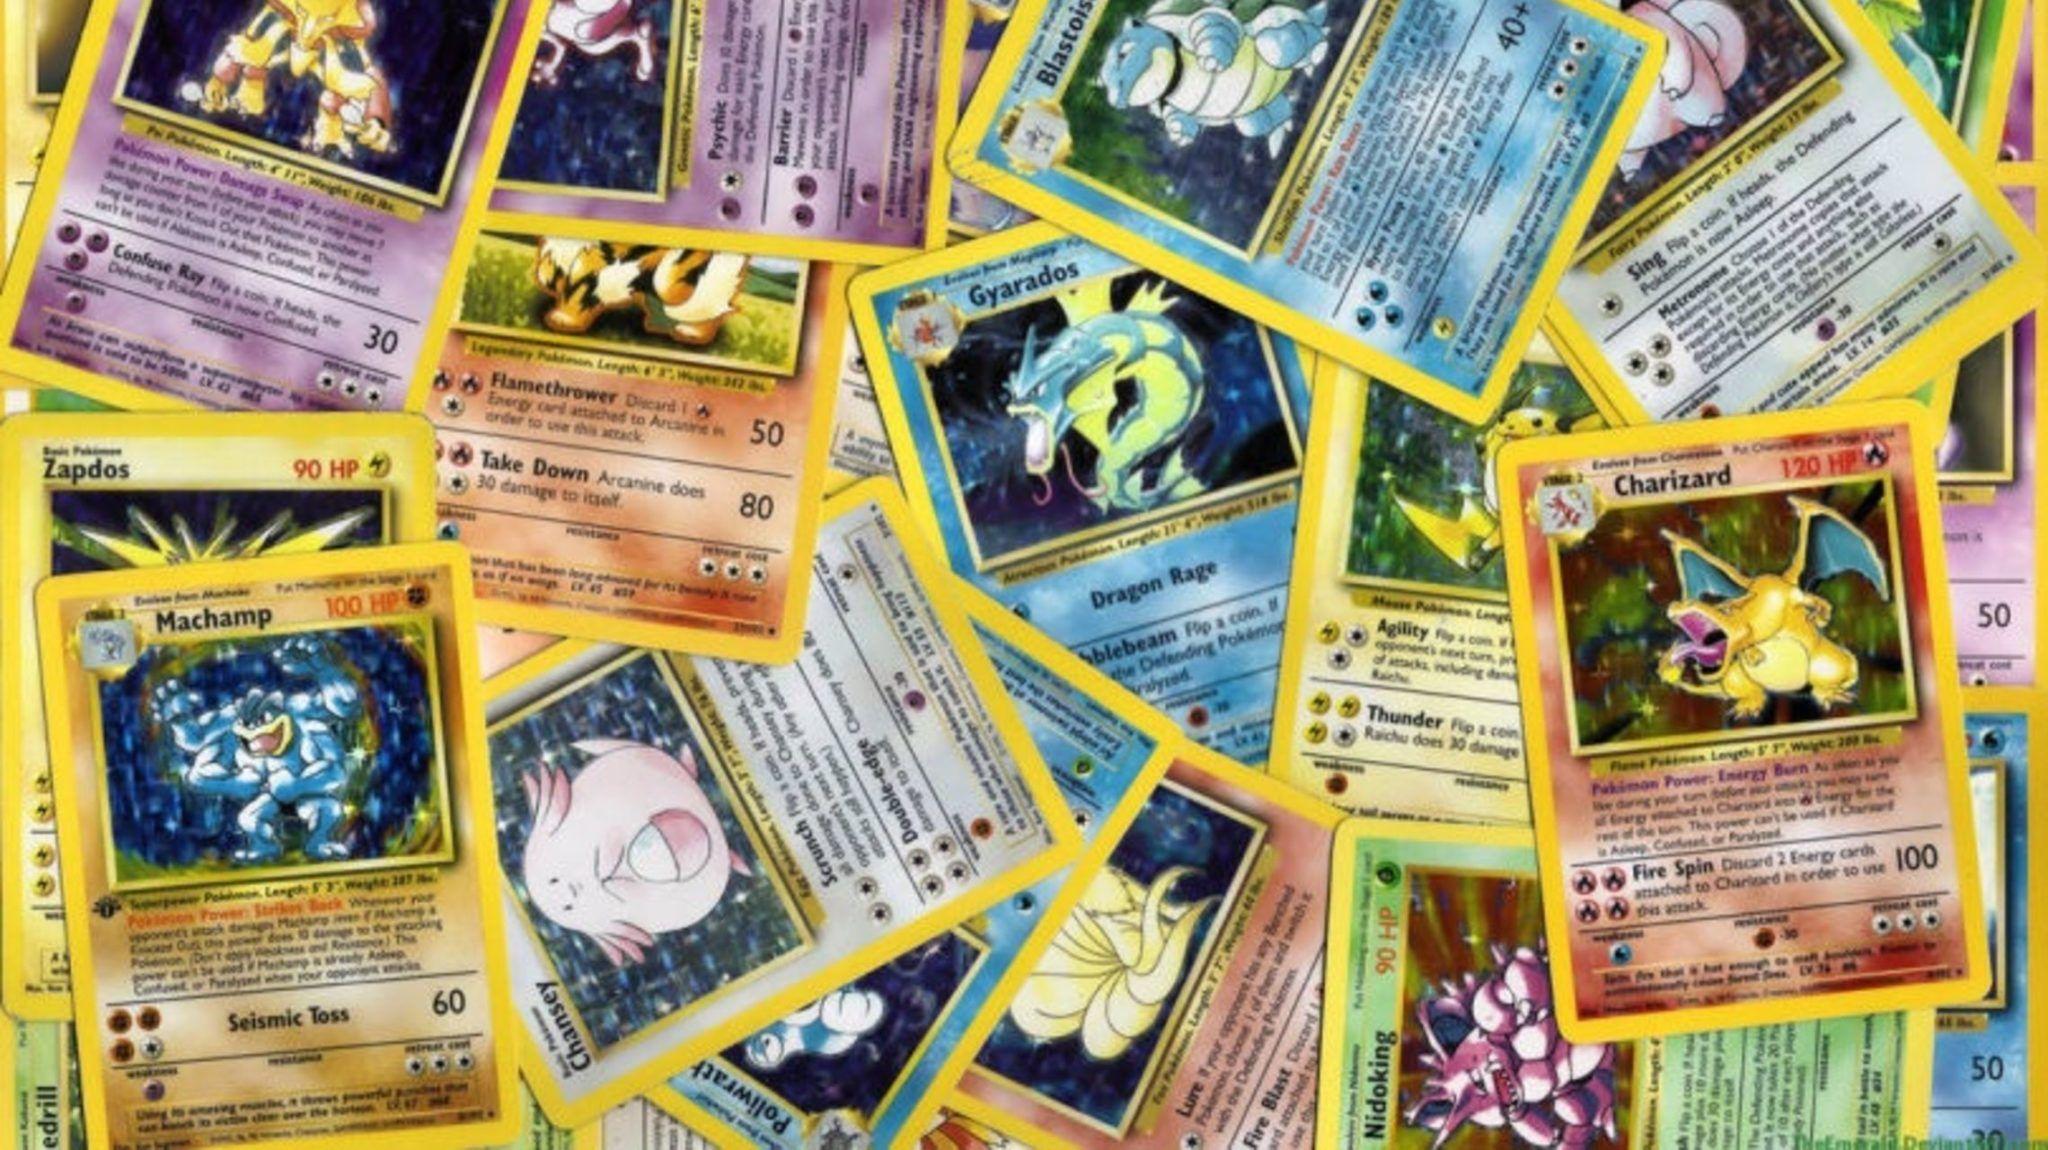 Pokemon cards all spread out